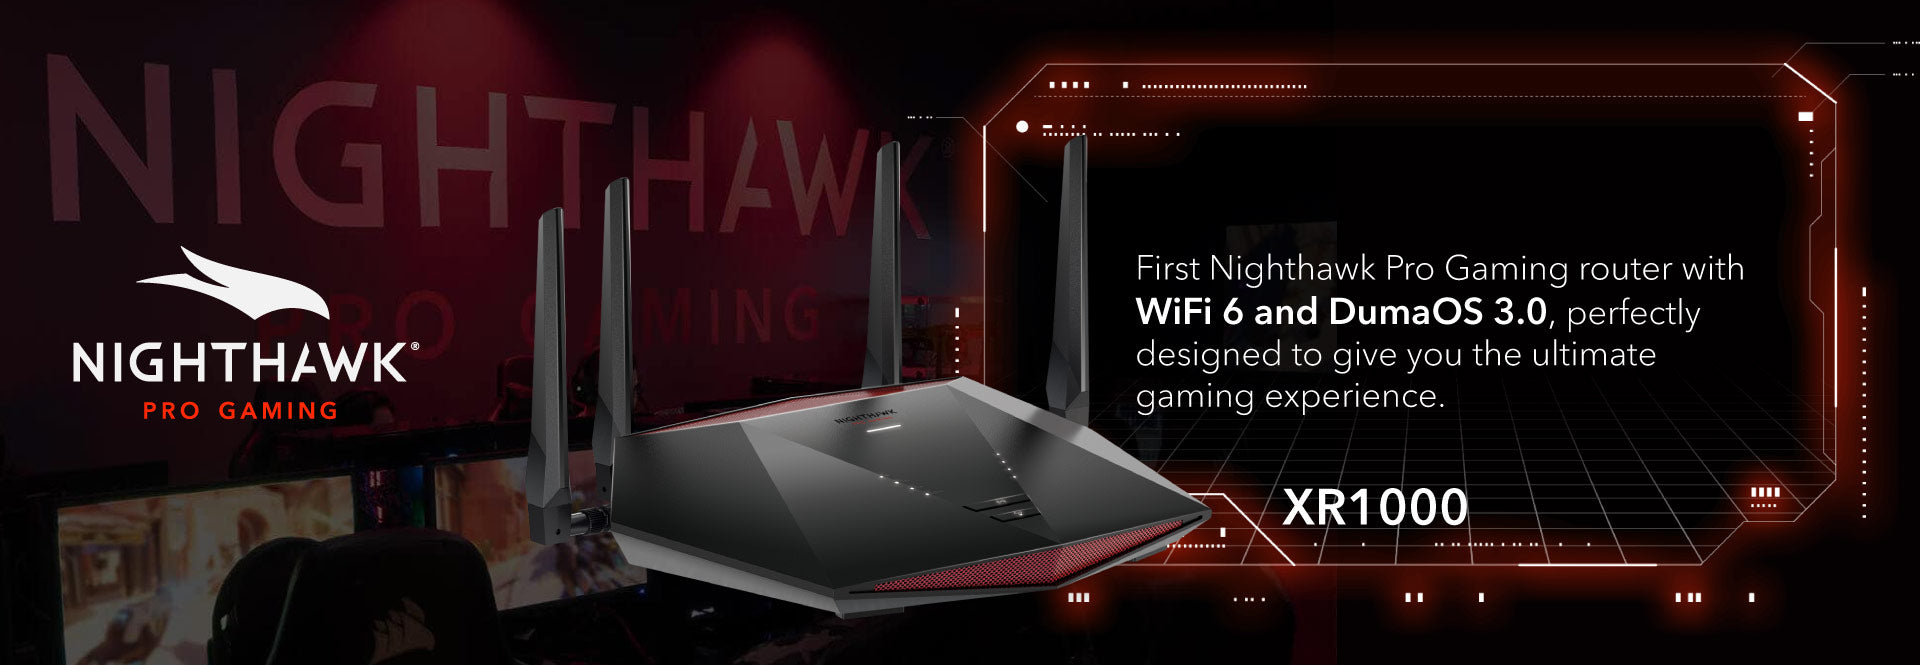 Nighthawk XR1000 Pro Gaming WiFi 6 Router with DumaOS 3.0 - AX5400 –